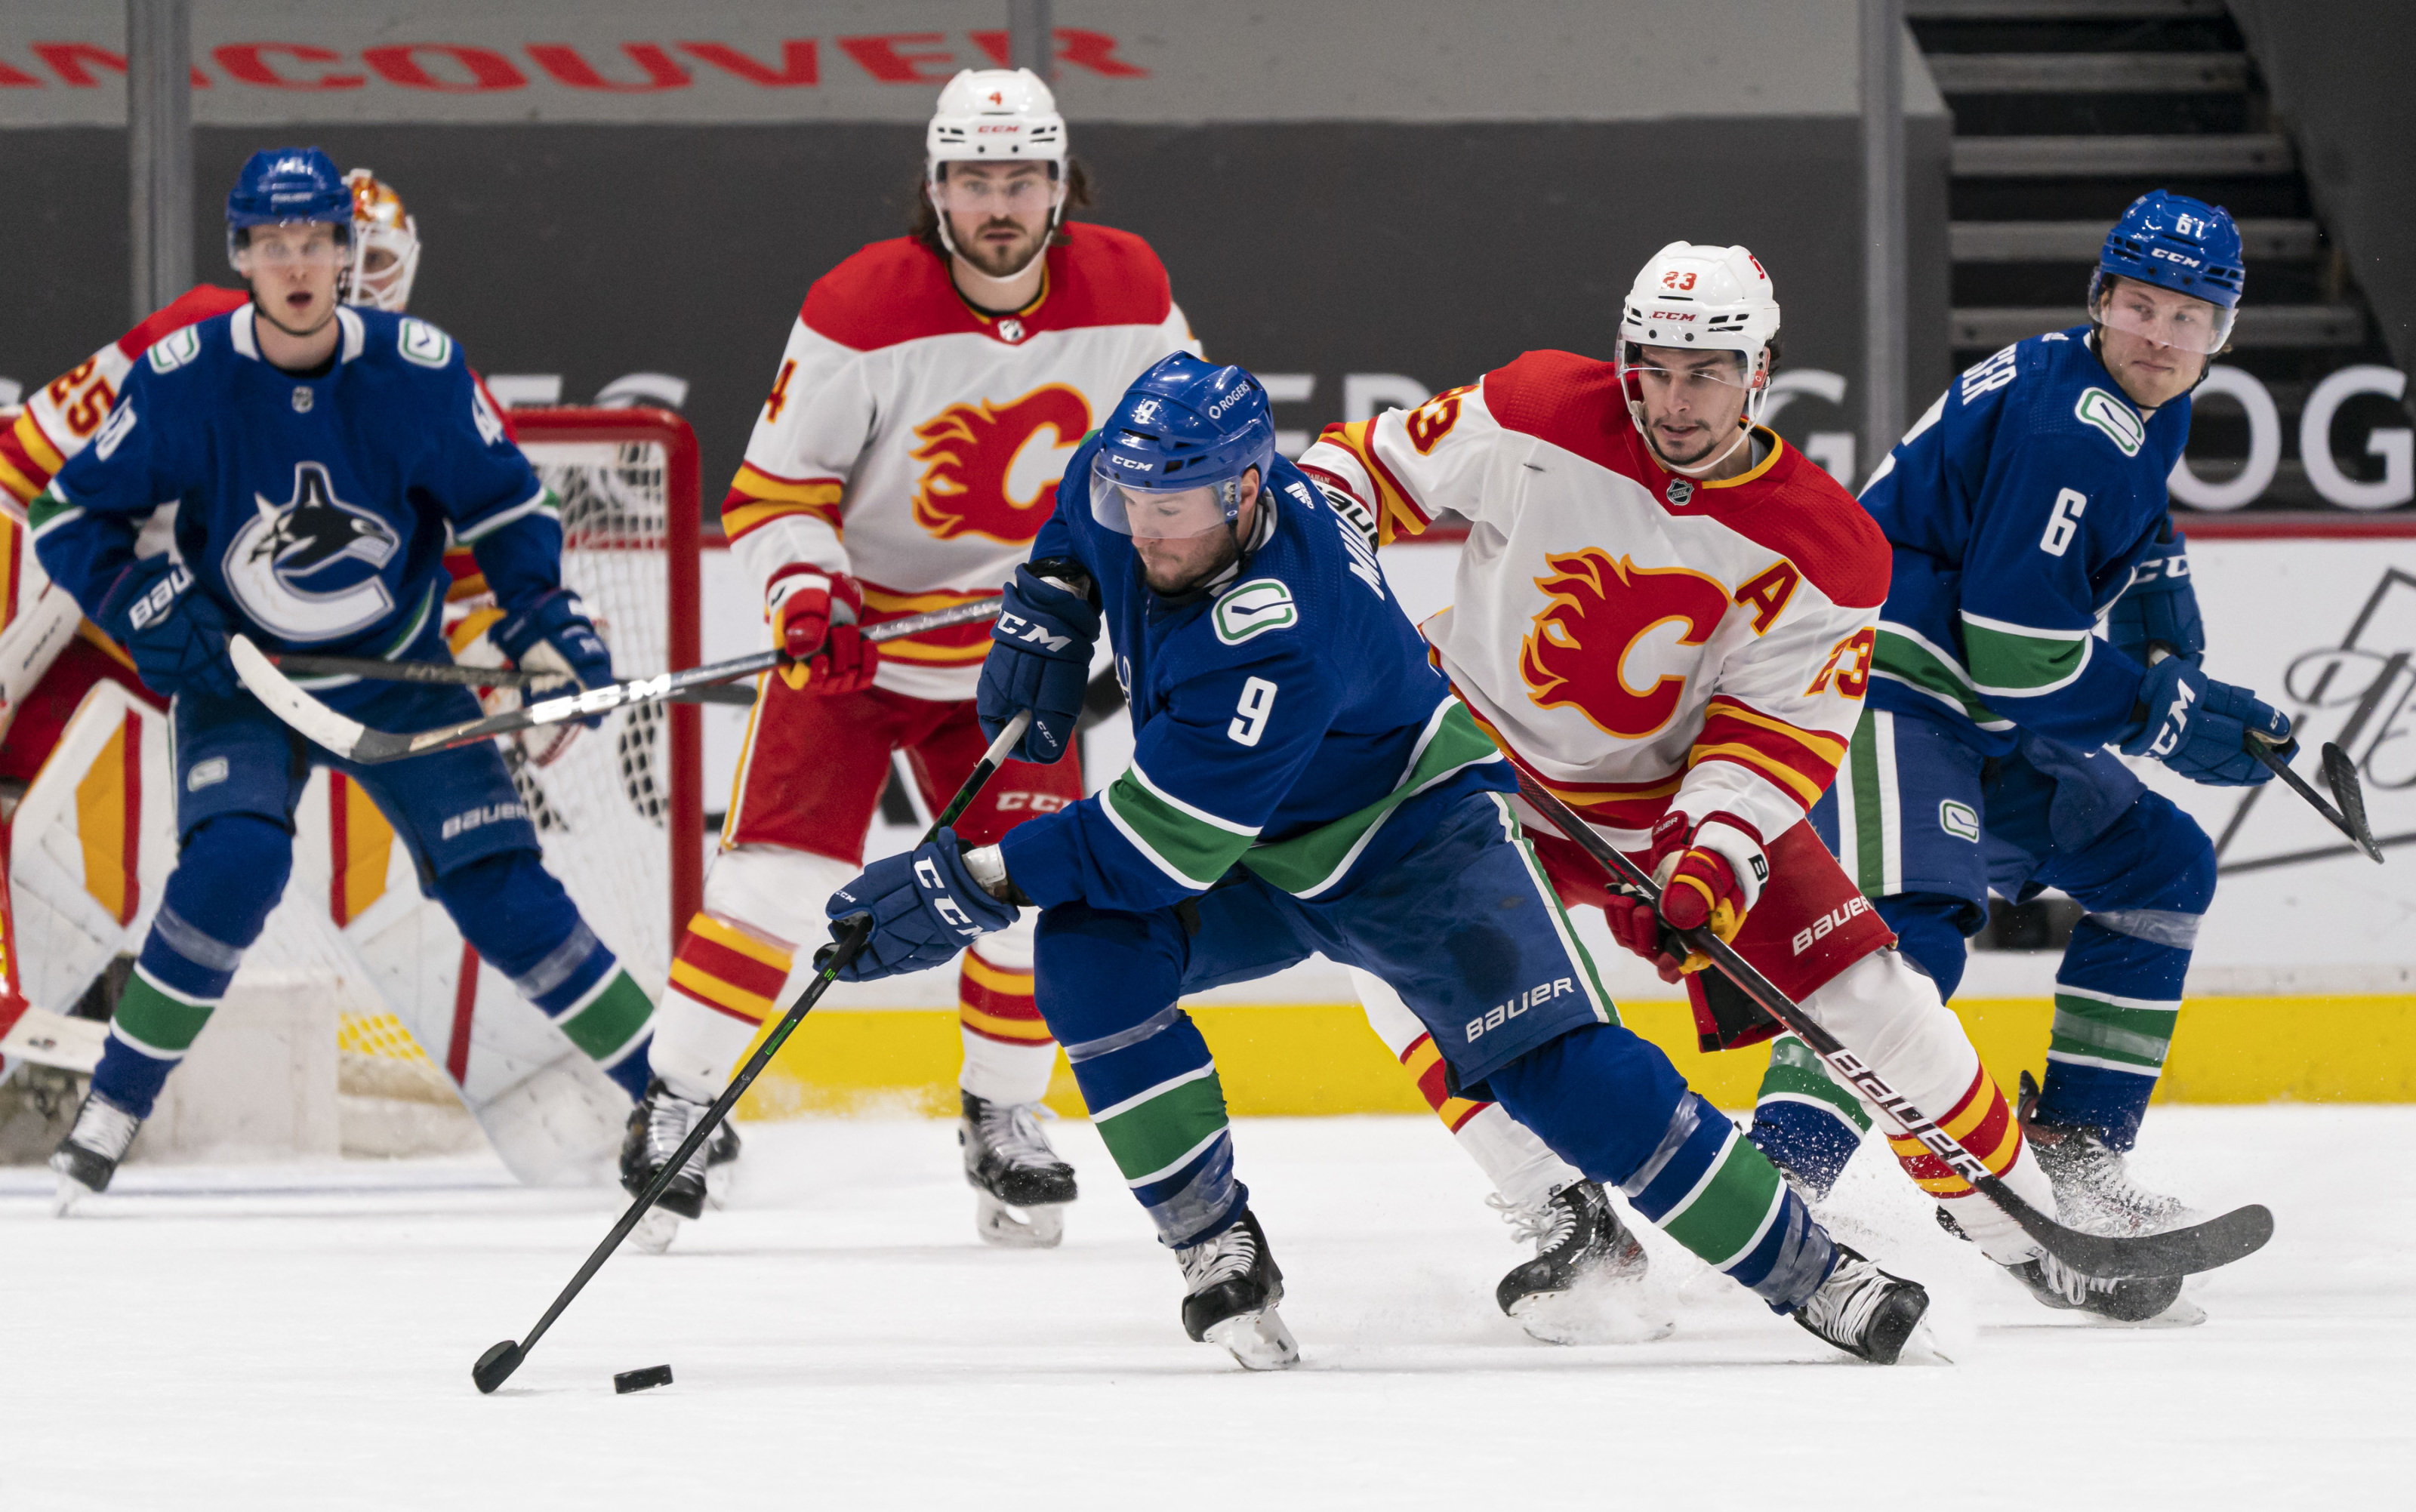 Gallery: Flames and Canucks battle in Game 4 of the playoffs